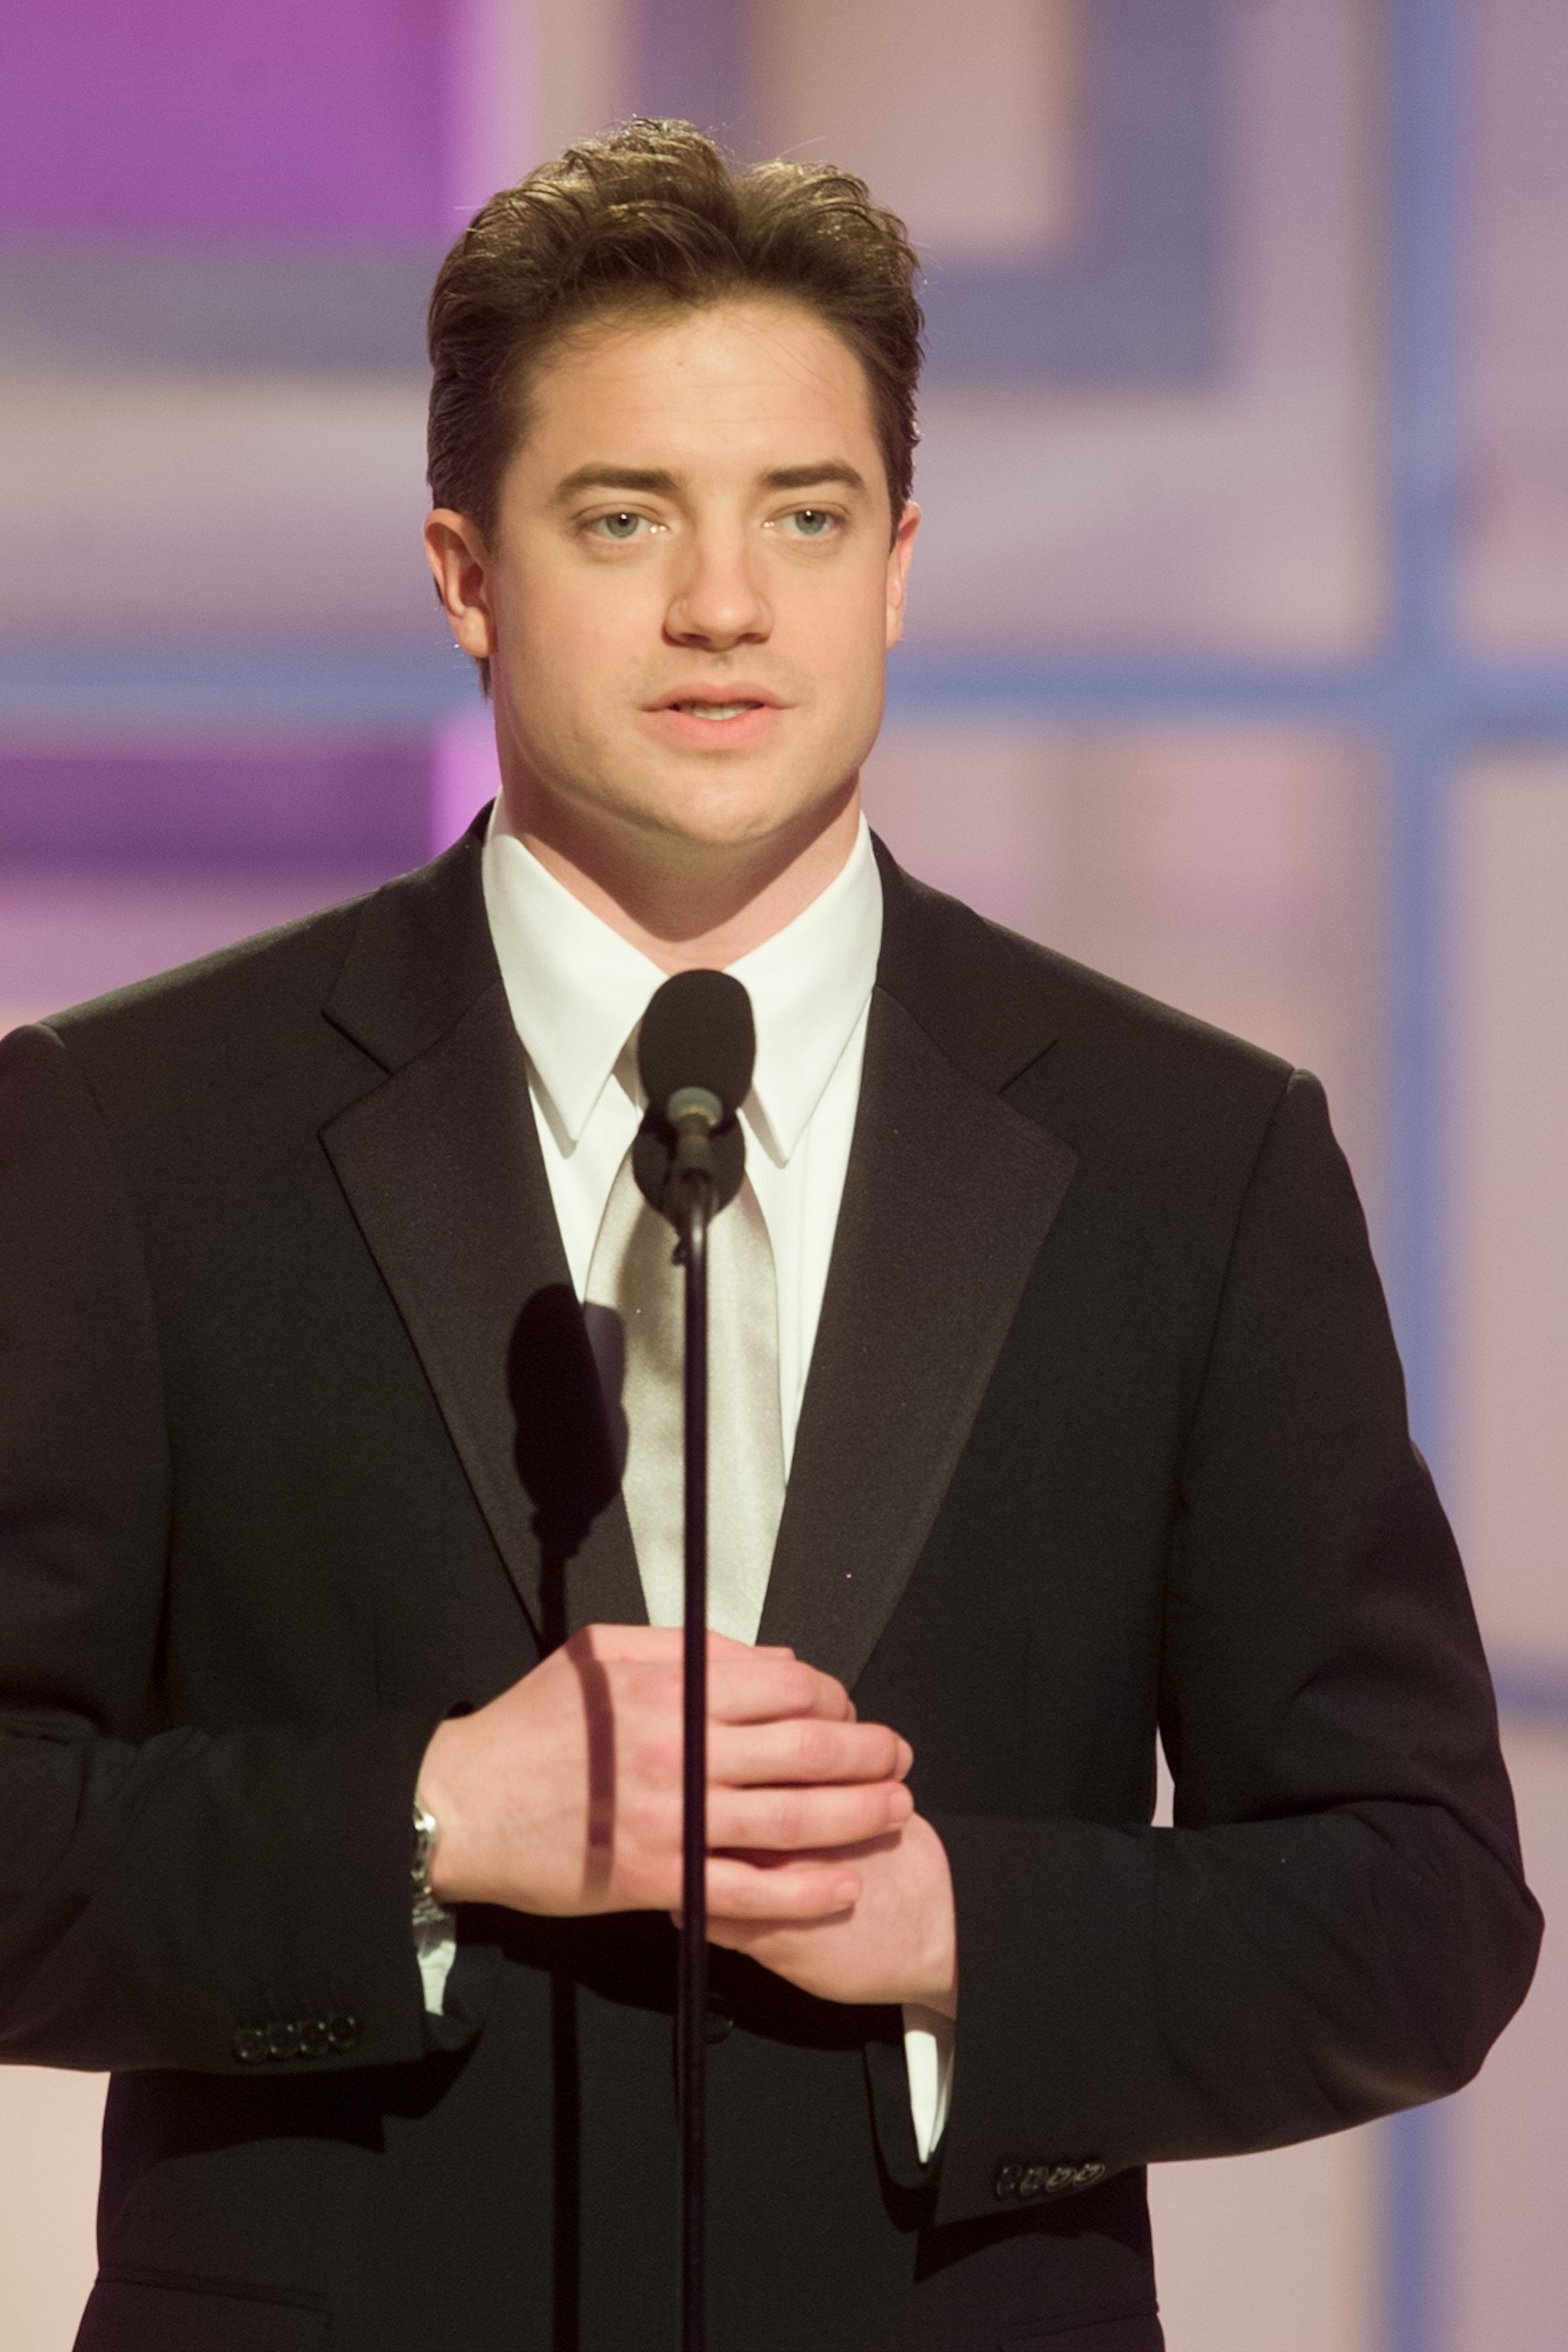 Brendan Fraser at the 60th Annual Golden Globe Awards on January 19, 2003. | Source: Getty Images